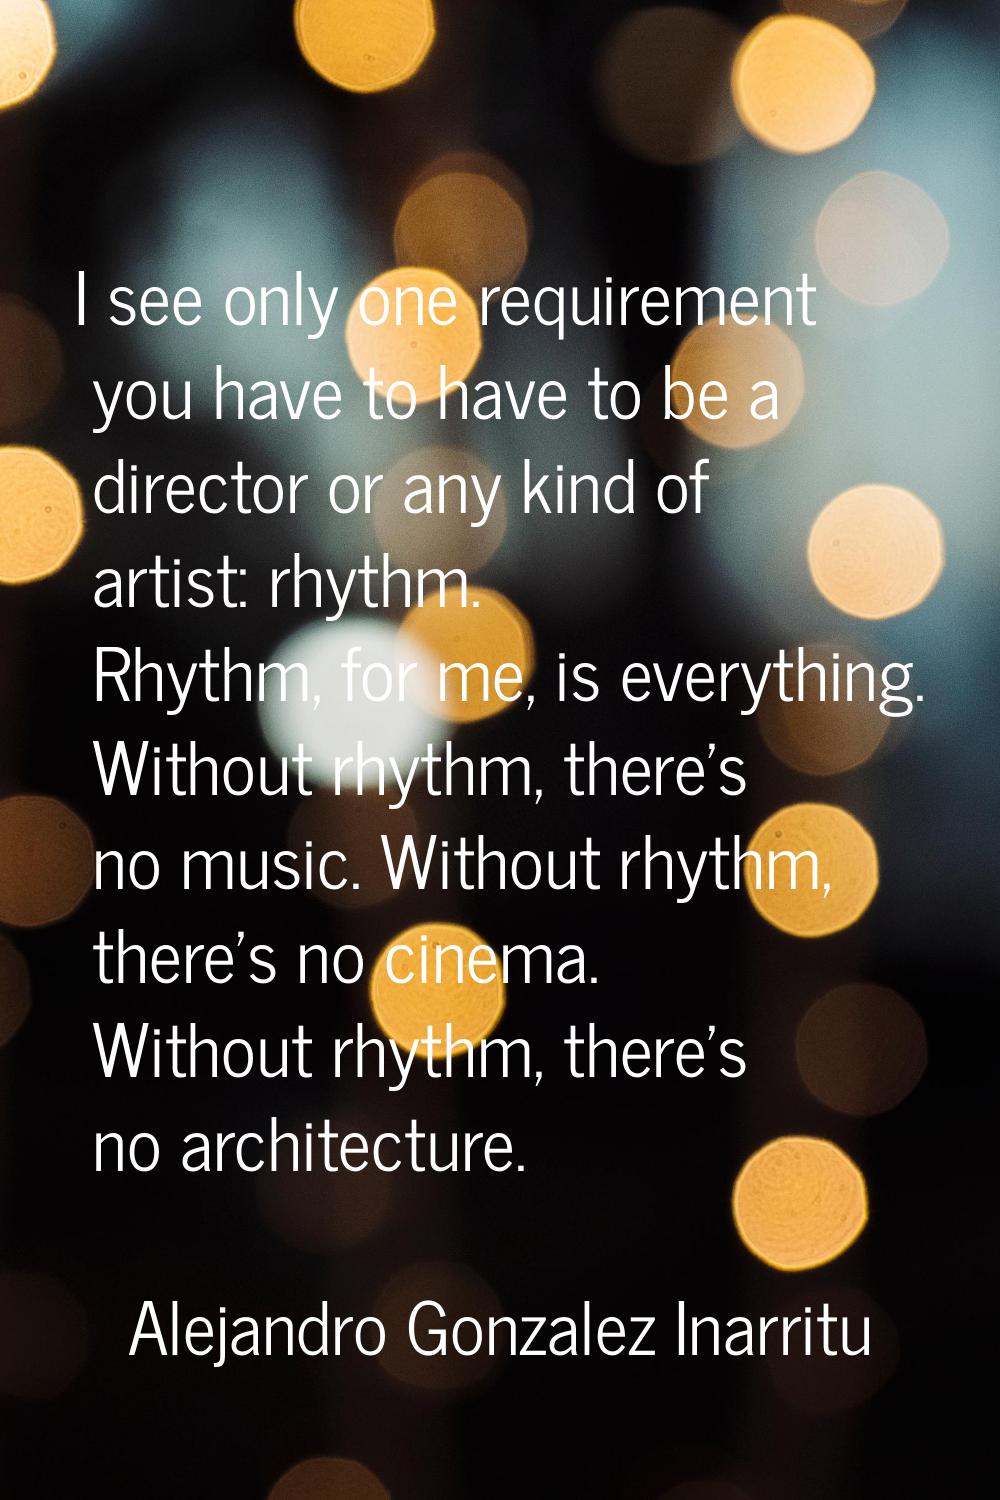 I see only one requirement you have to have to be a director or any kind of artist: rhythm. Rhythm,